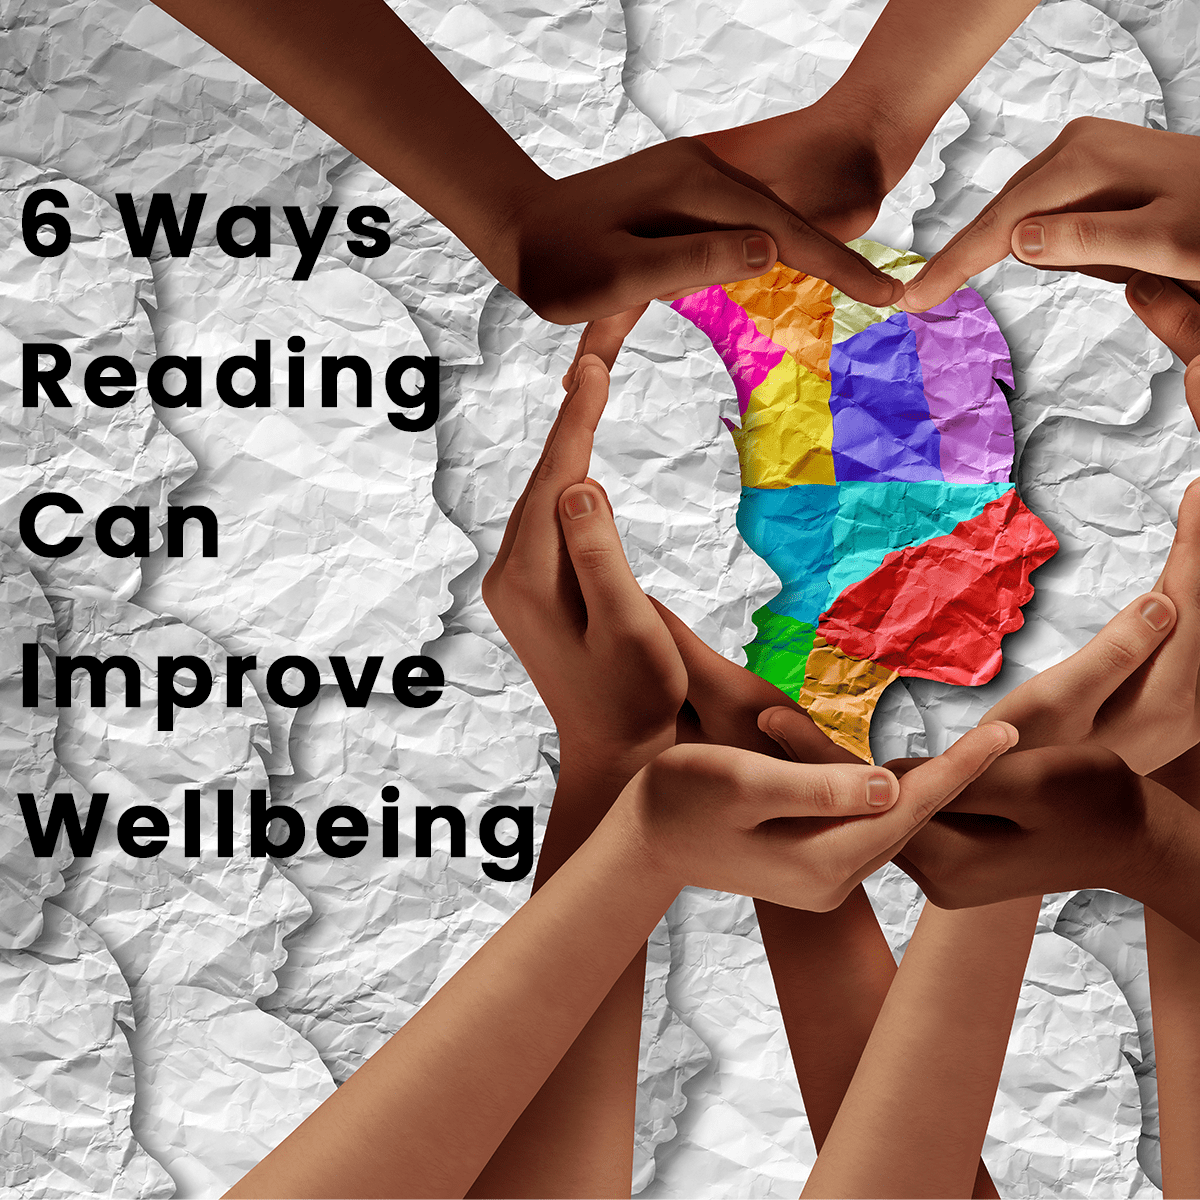 Six Ways Reading Can Improve Wellbeing